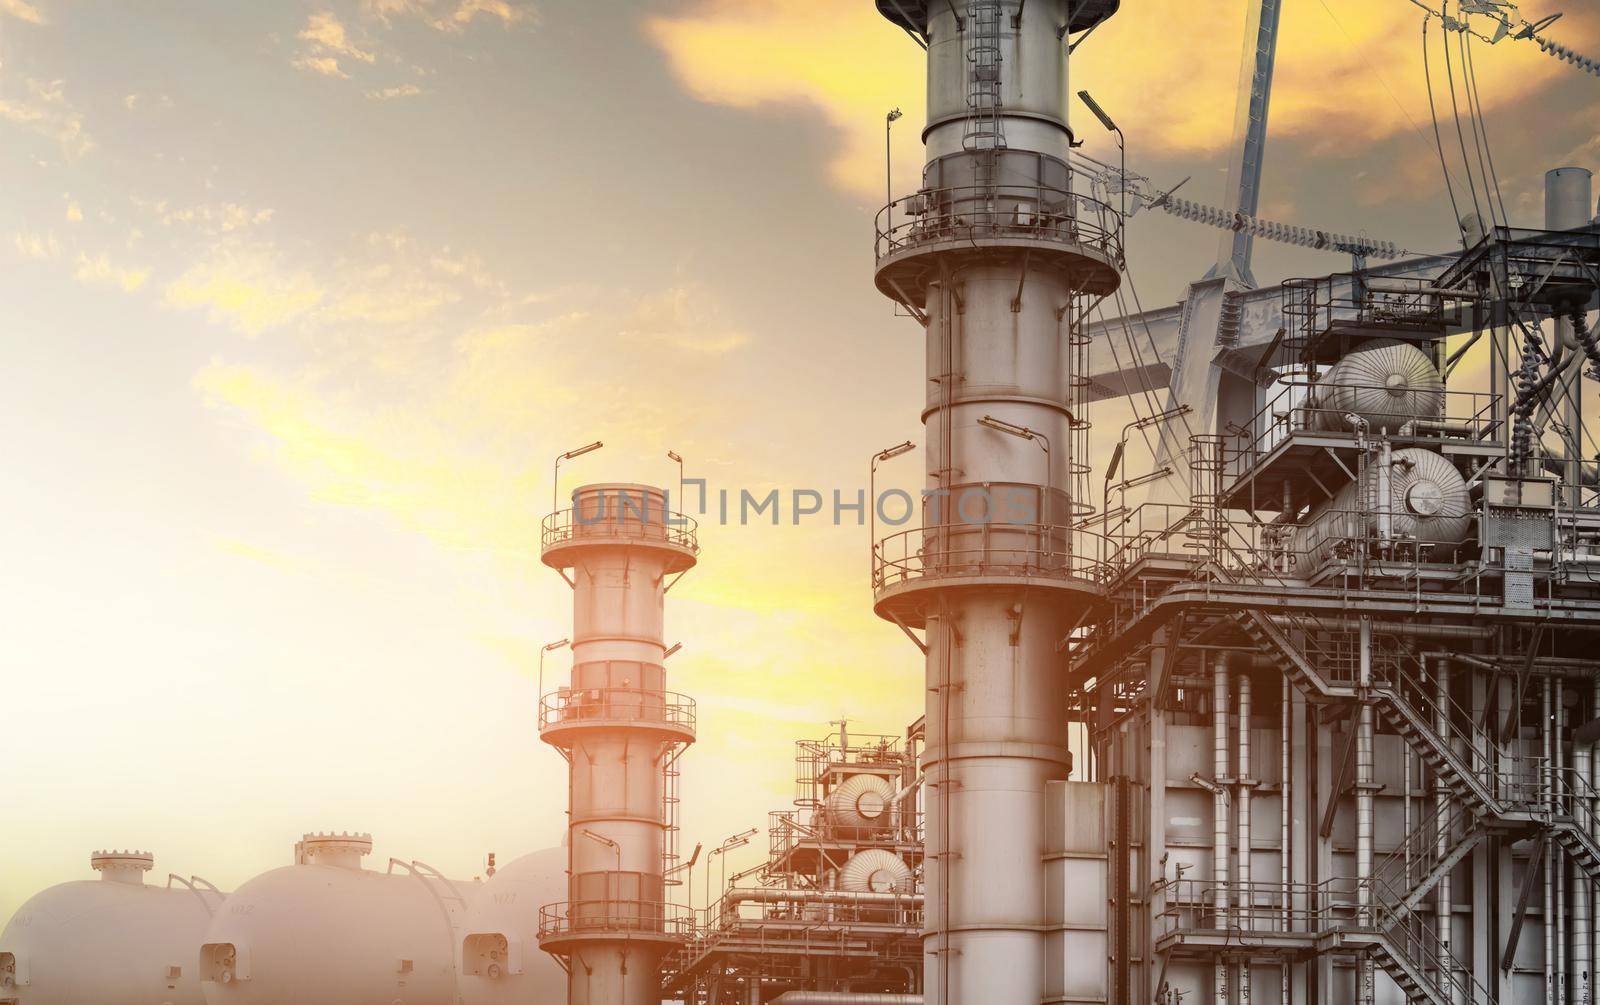 Gas turbine electrical power plant. Global energy crisis concept. Natural gas tank. Industrial gas storage tank. LNG or liquefied natural gas storage tank. Power plants with energy crisis concept.